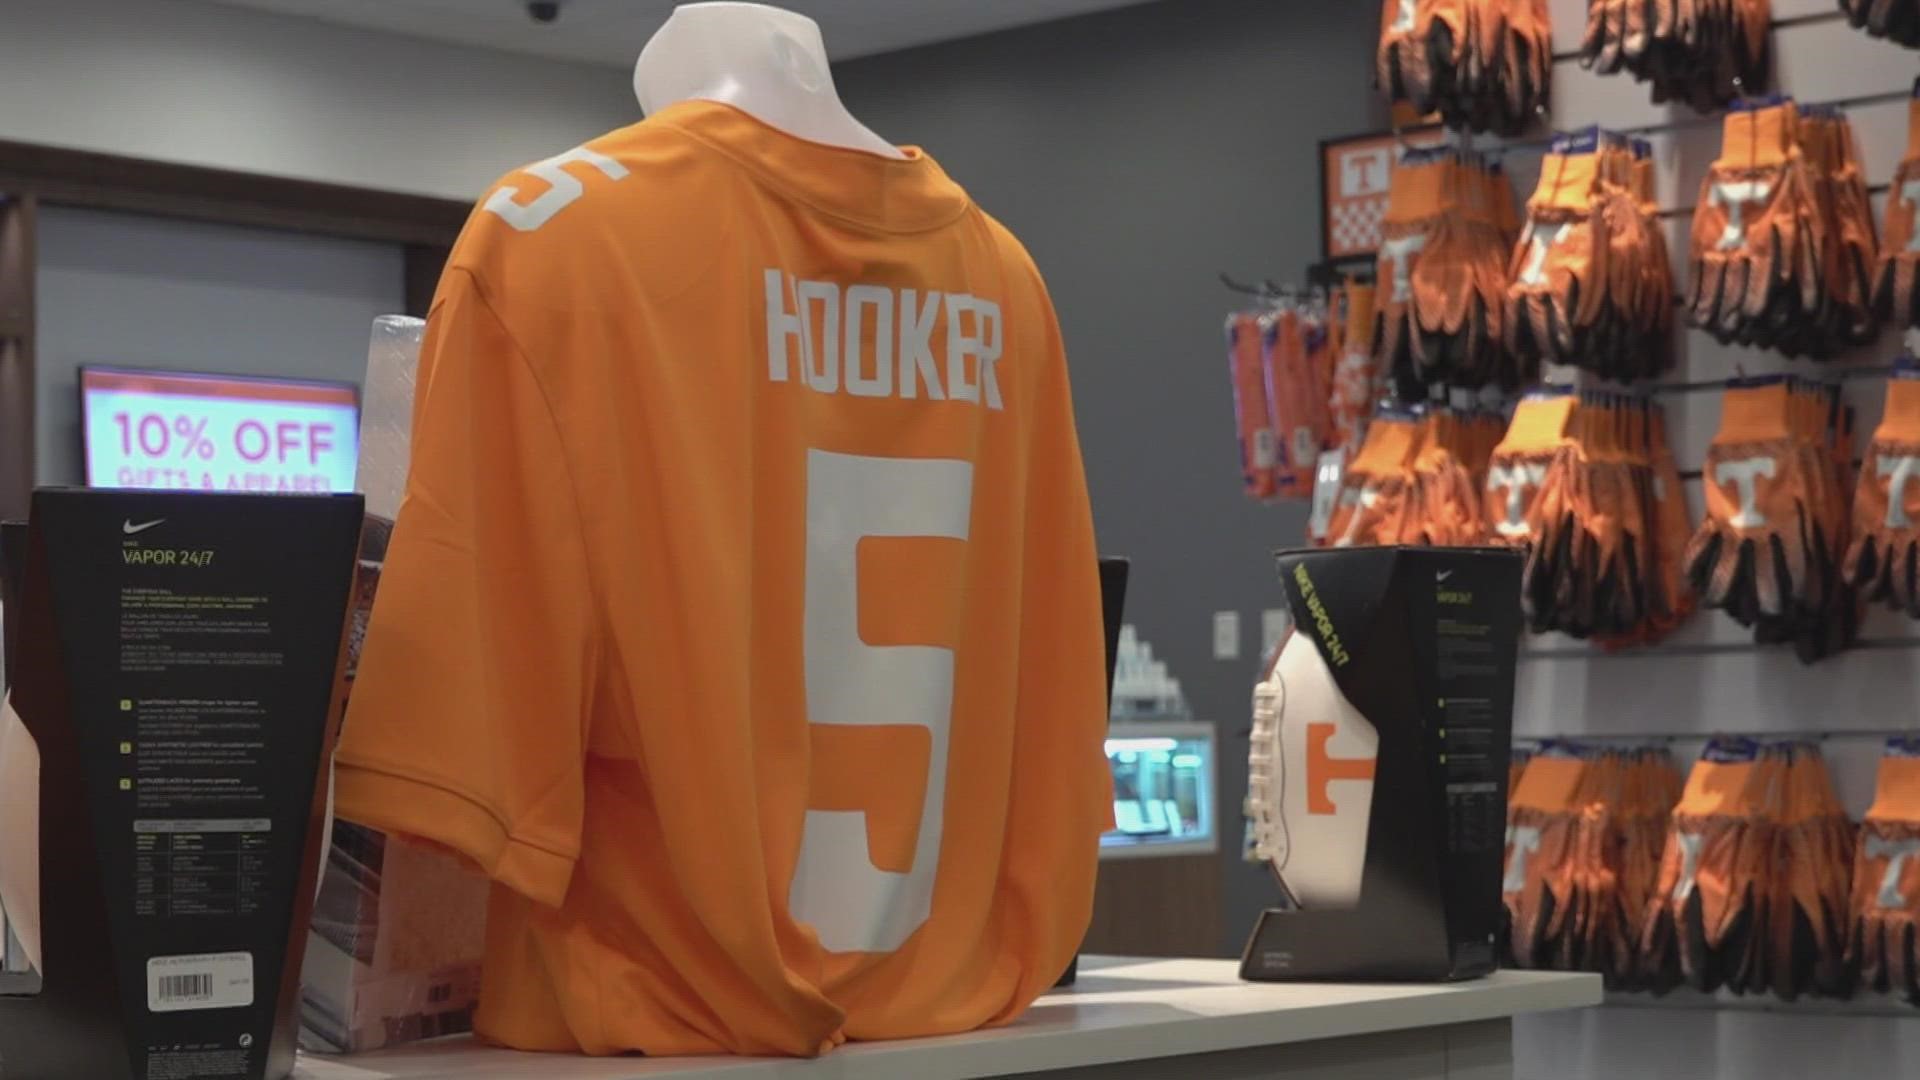 All eyes are now focused on the Vols' match-up with Georgia this Saturday and when it comes to the players' jerseys everyone wants to wear, two players stand out.